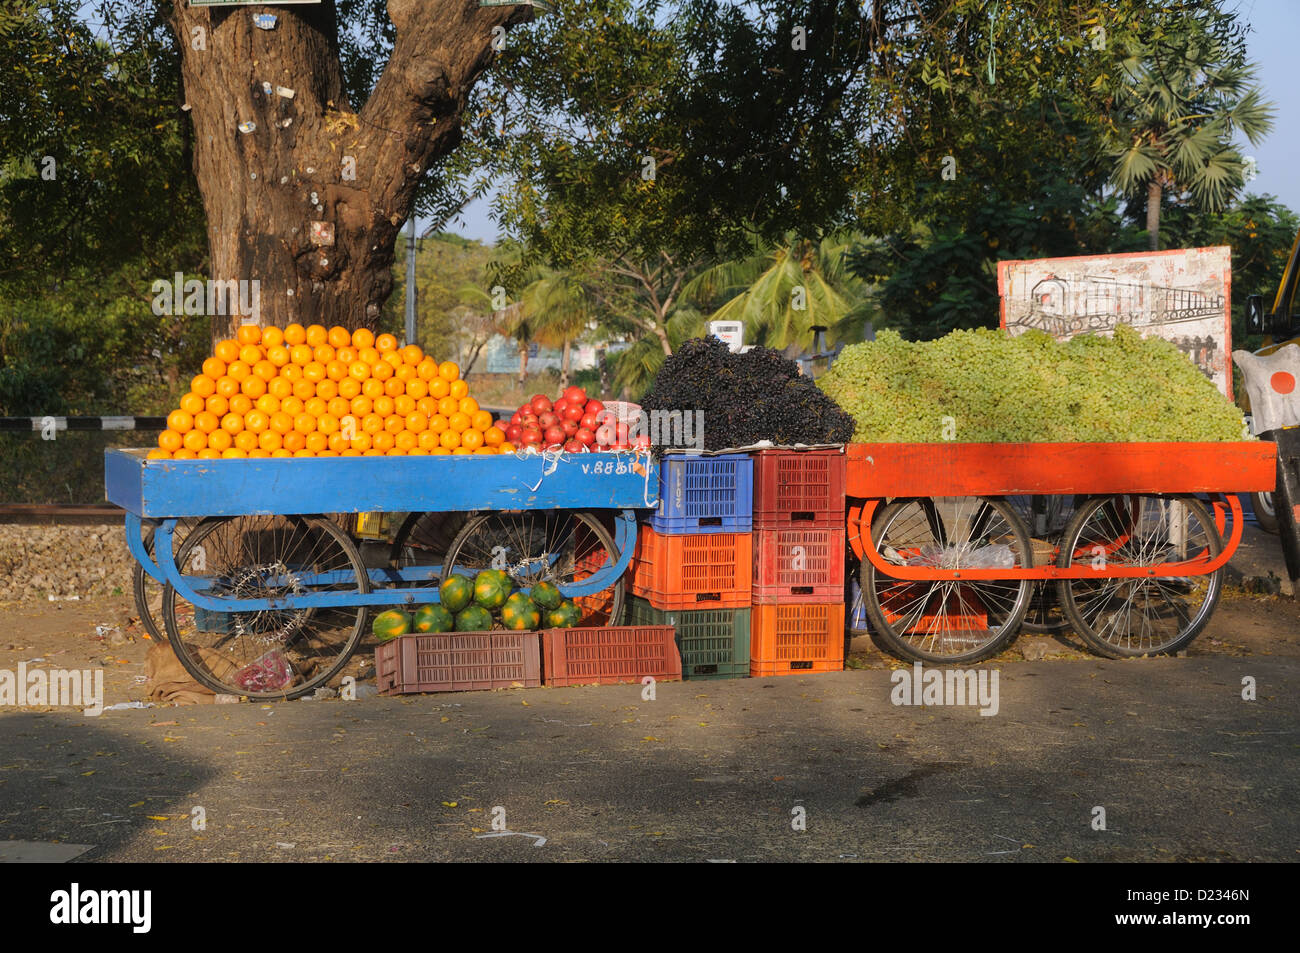 A Mobile Fruit stall at Erode, Tamil Nadu, India Stock Photo